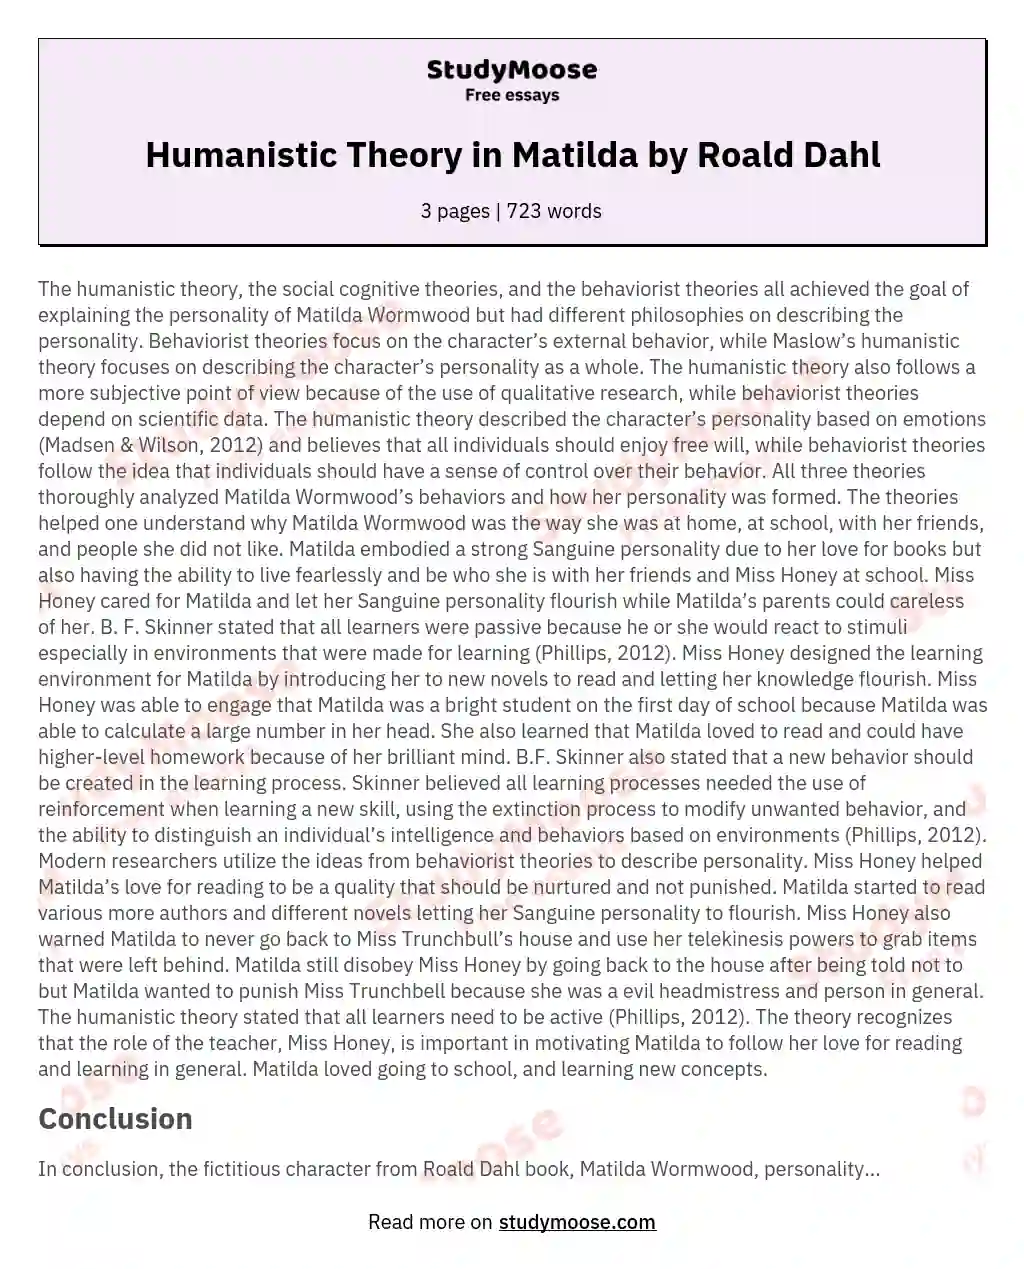 Humanistic Theory in Matilda by Roald Dahl essay